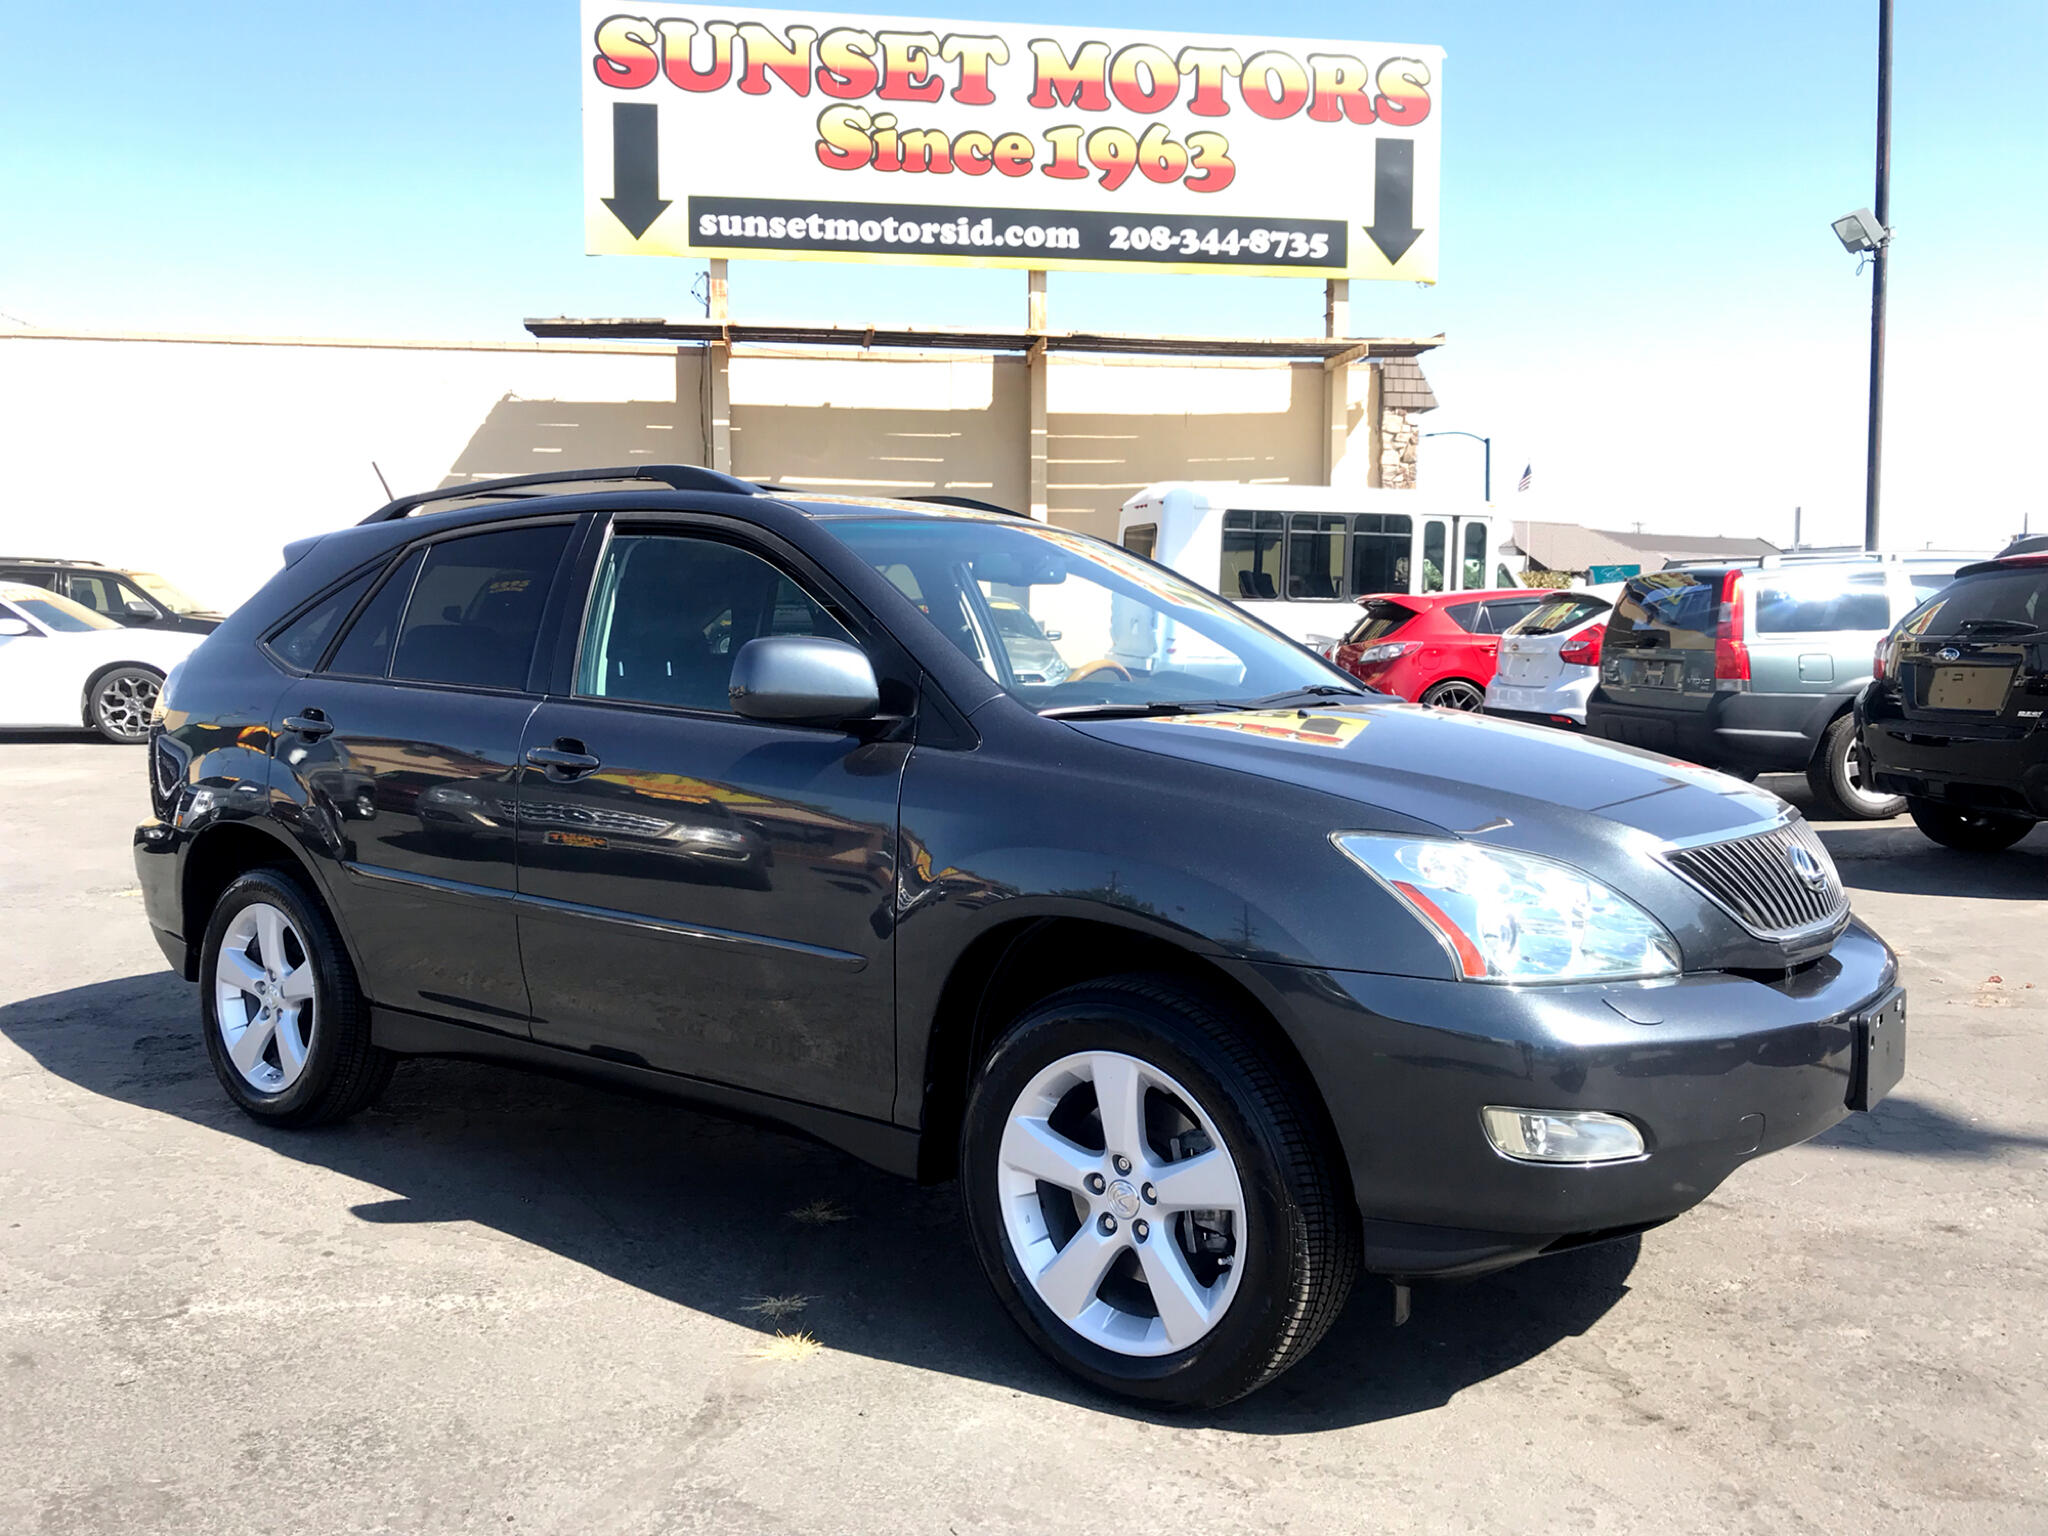 Used 2007 Lexus RX 350 FWD 4dr for Sale in Boise ID 83702 Sunset Motors